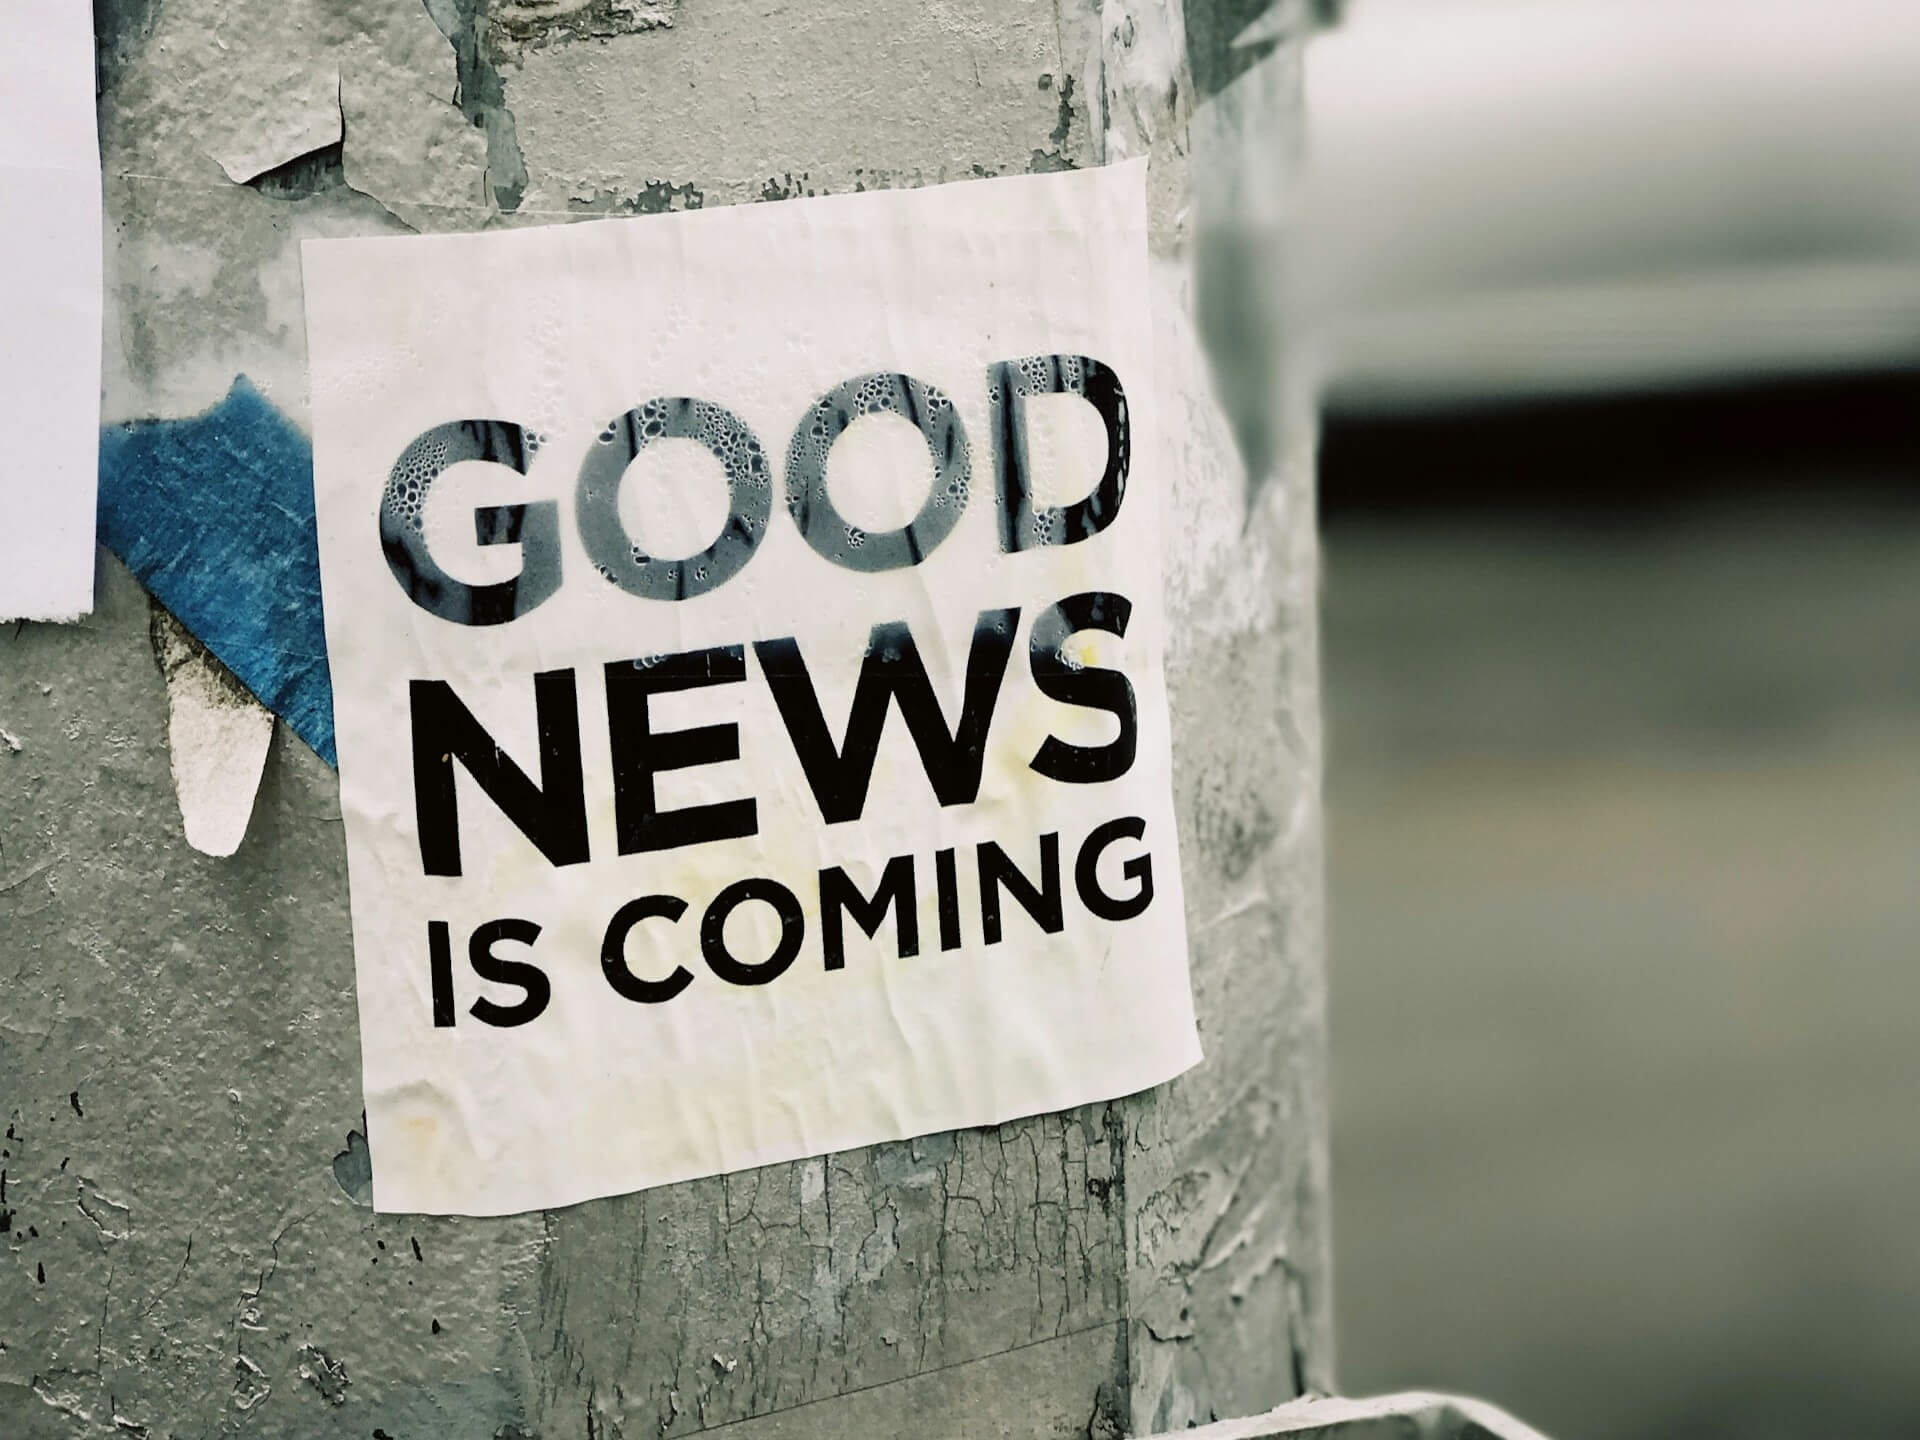 "Good news is coming" sign taped to a pole on the street